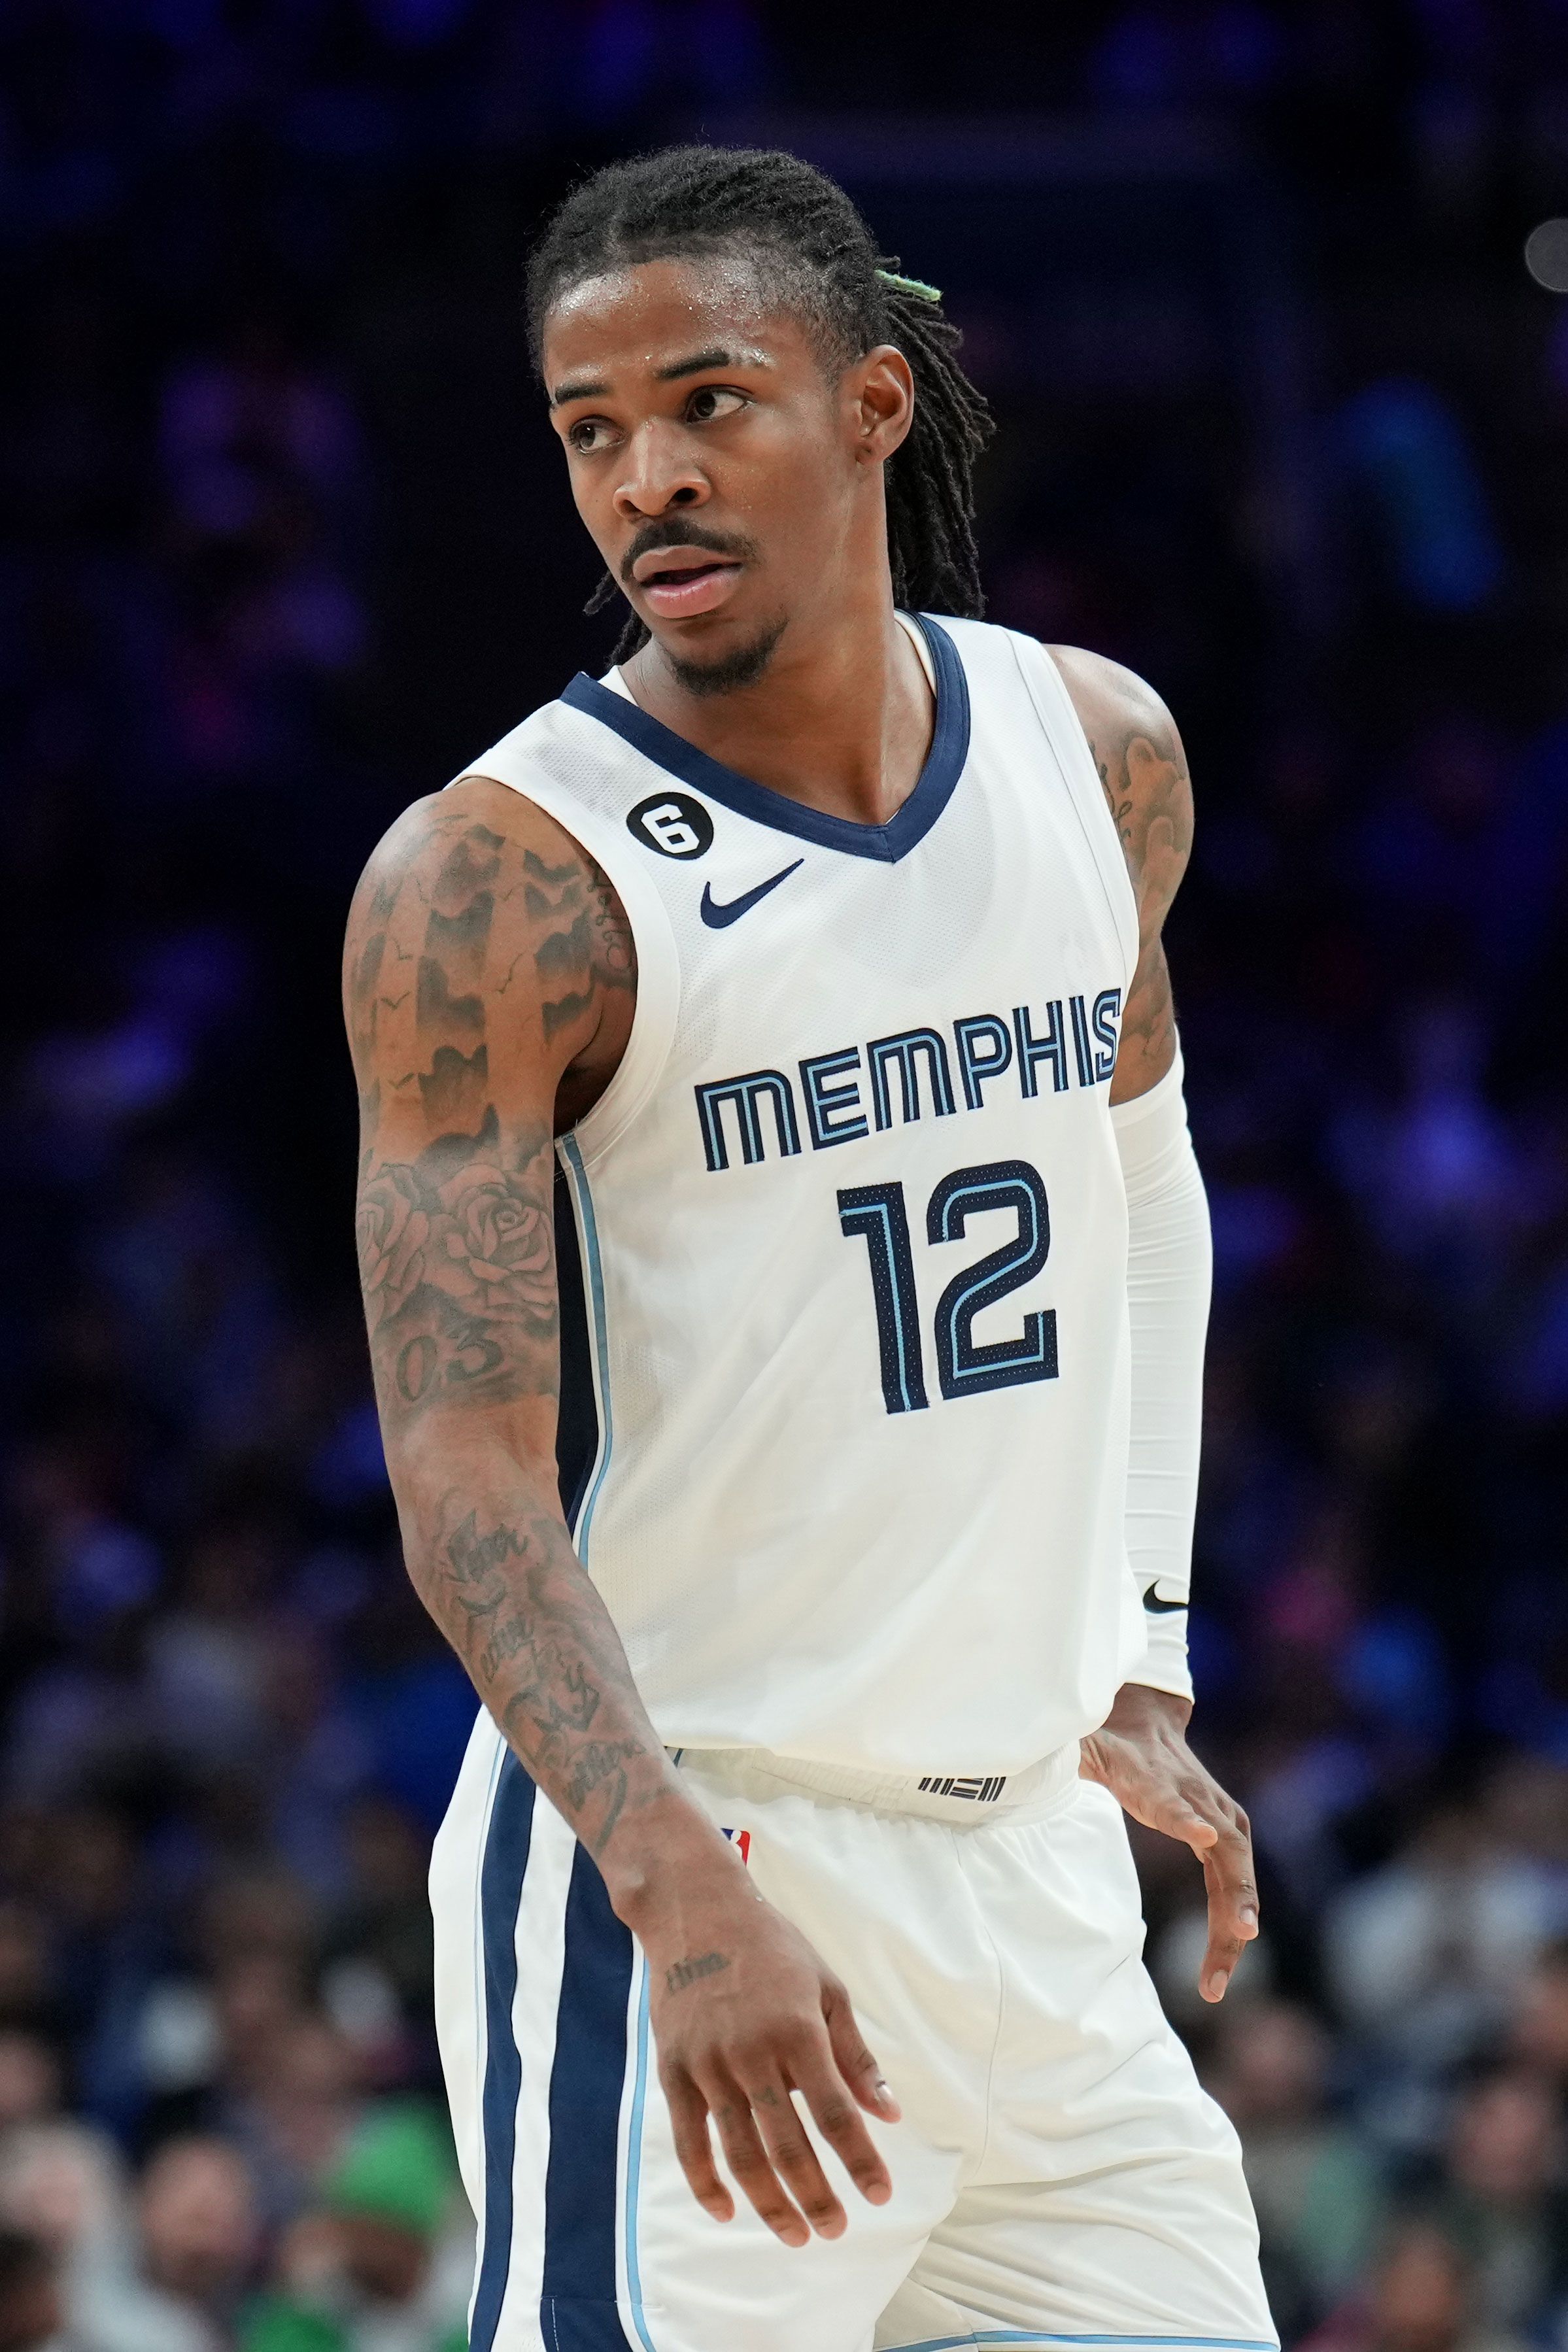 Grizzlies Guard Ja Morant Moves Toward 'Redemption' After Gun Video - The  New York Times